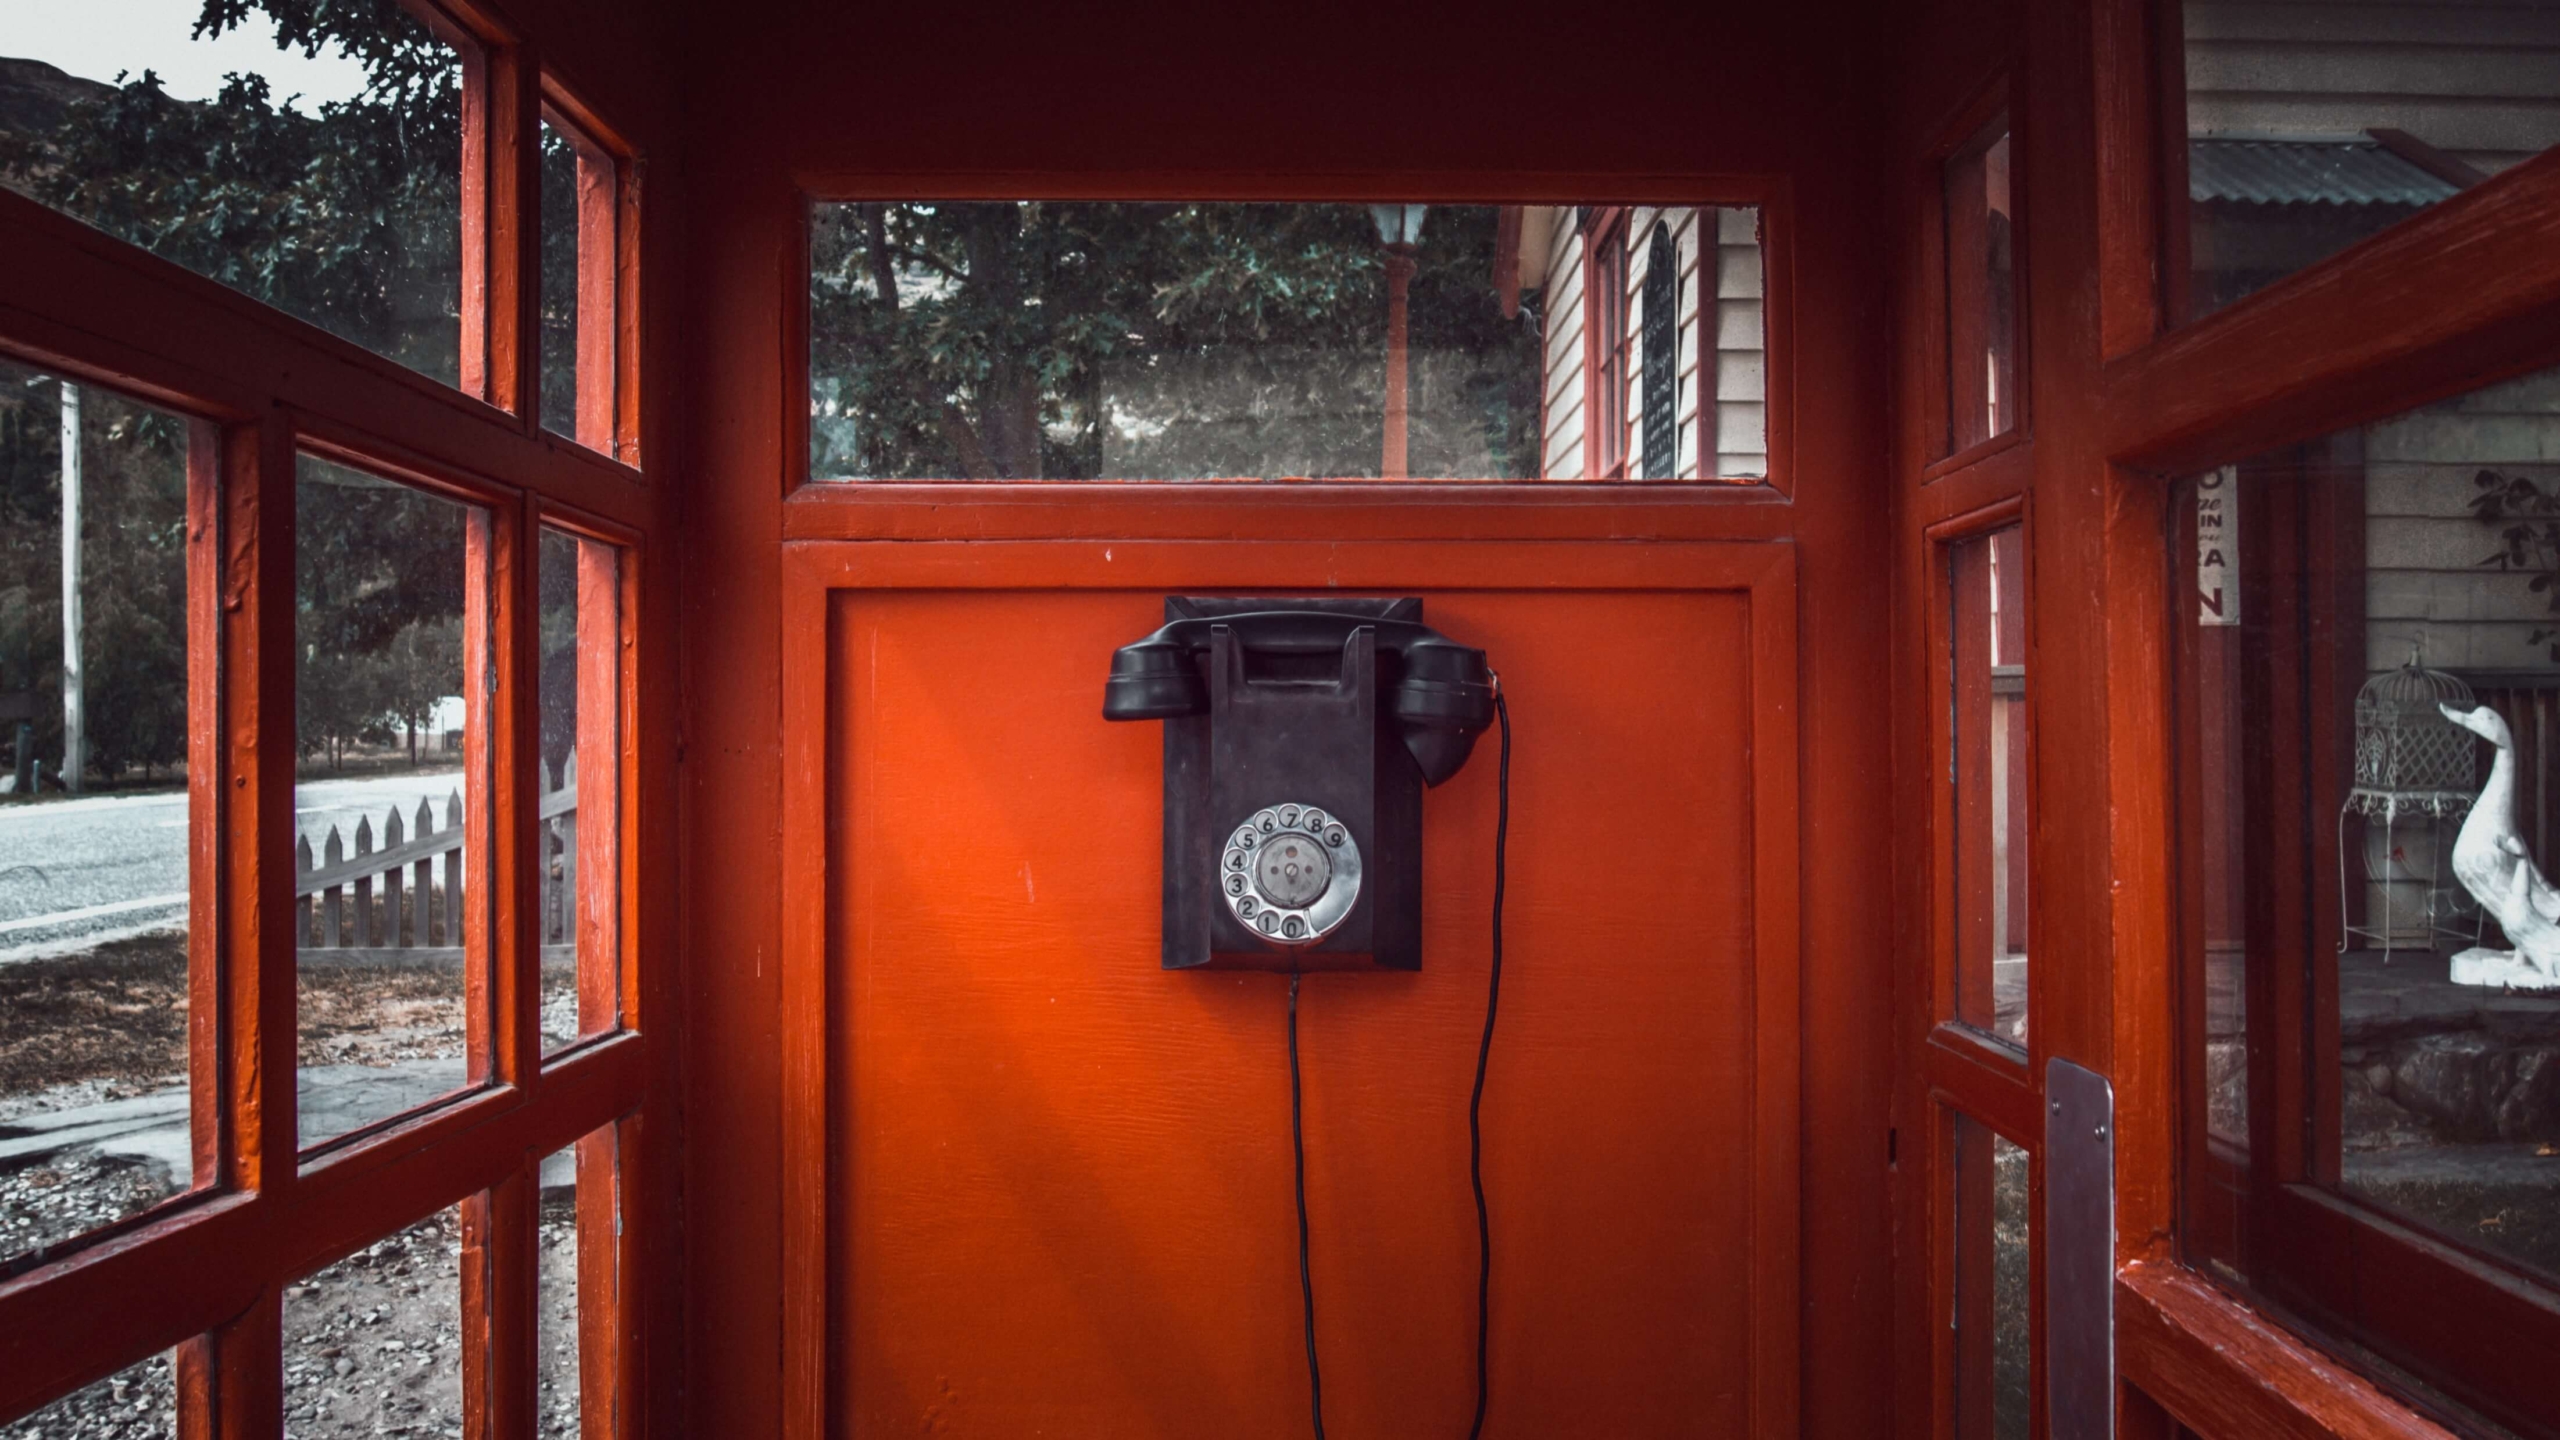 A vintage telephone booth with a rotary dial